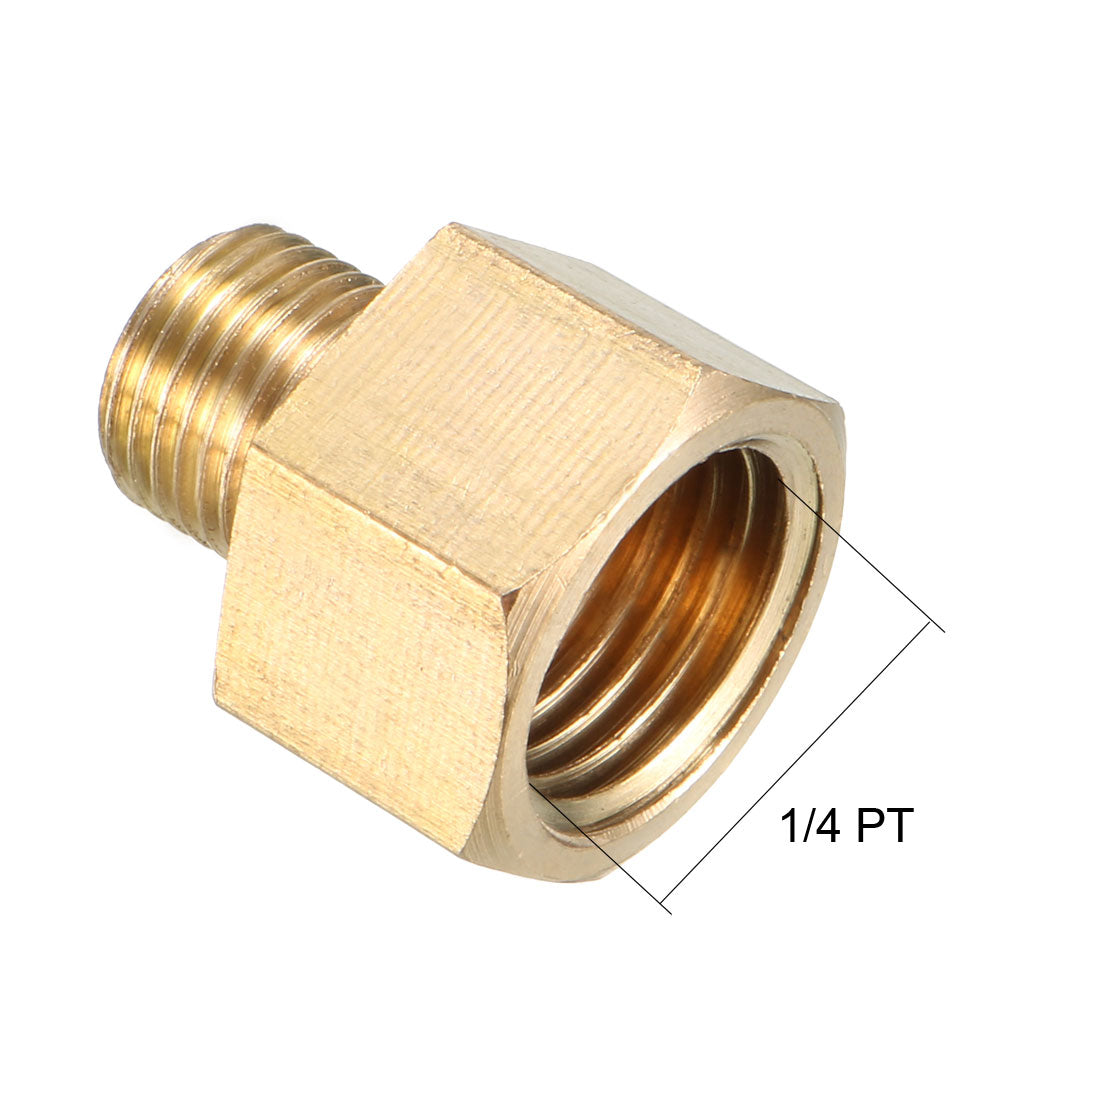 uxcell Uxcell Brass Threaded Pipe Fitting 1/8 PT Male x 1/4 PT Female Coupling 3pcs